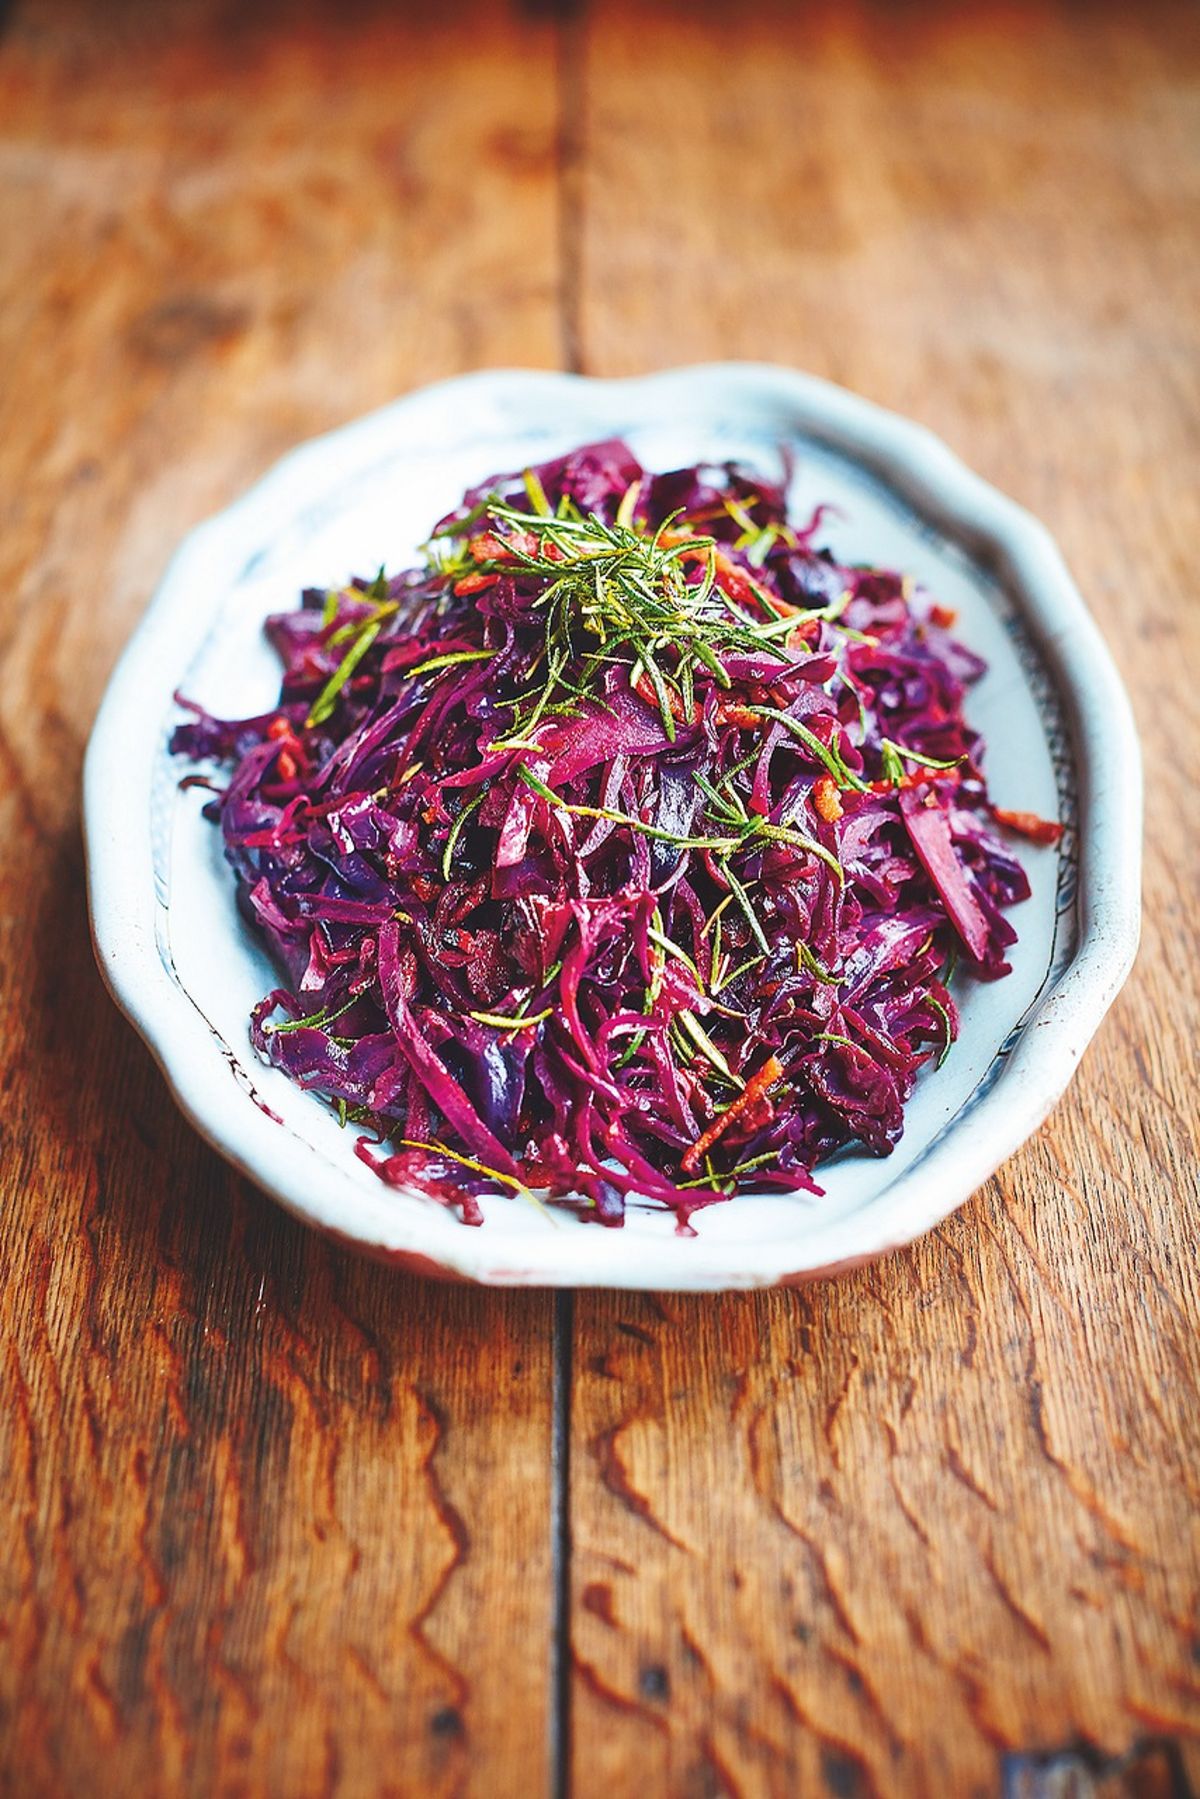 Red Cabbage Crispy Smoked Bacon & Rosemary, Apple, Fennel Seeds & Balsamic